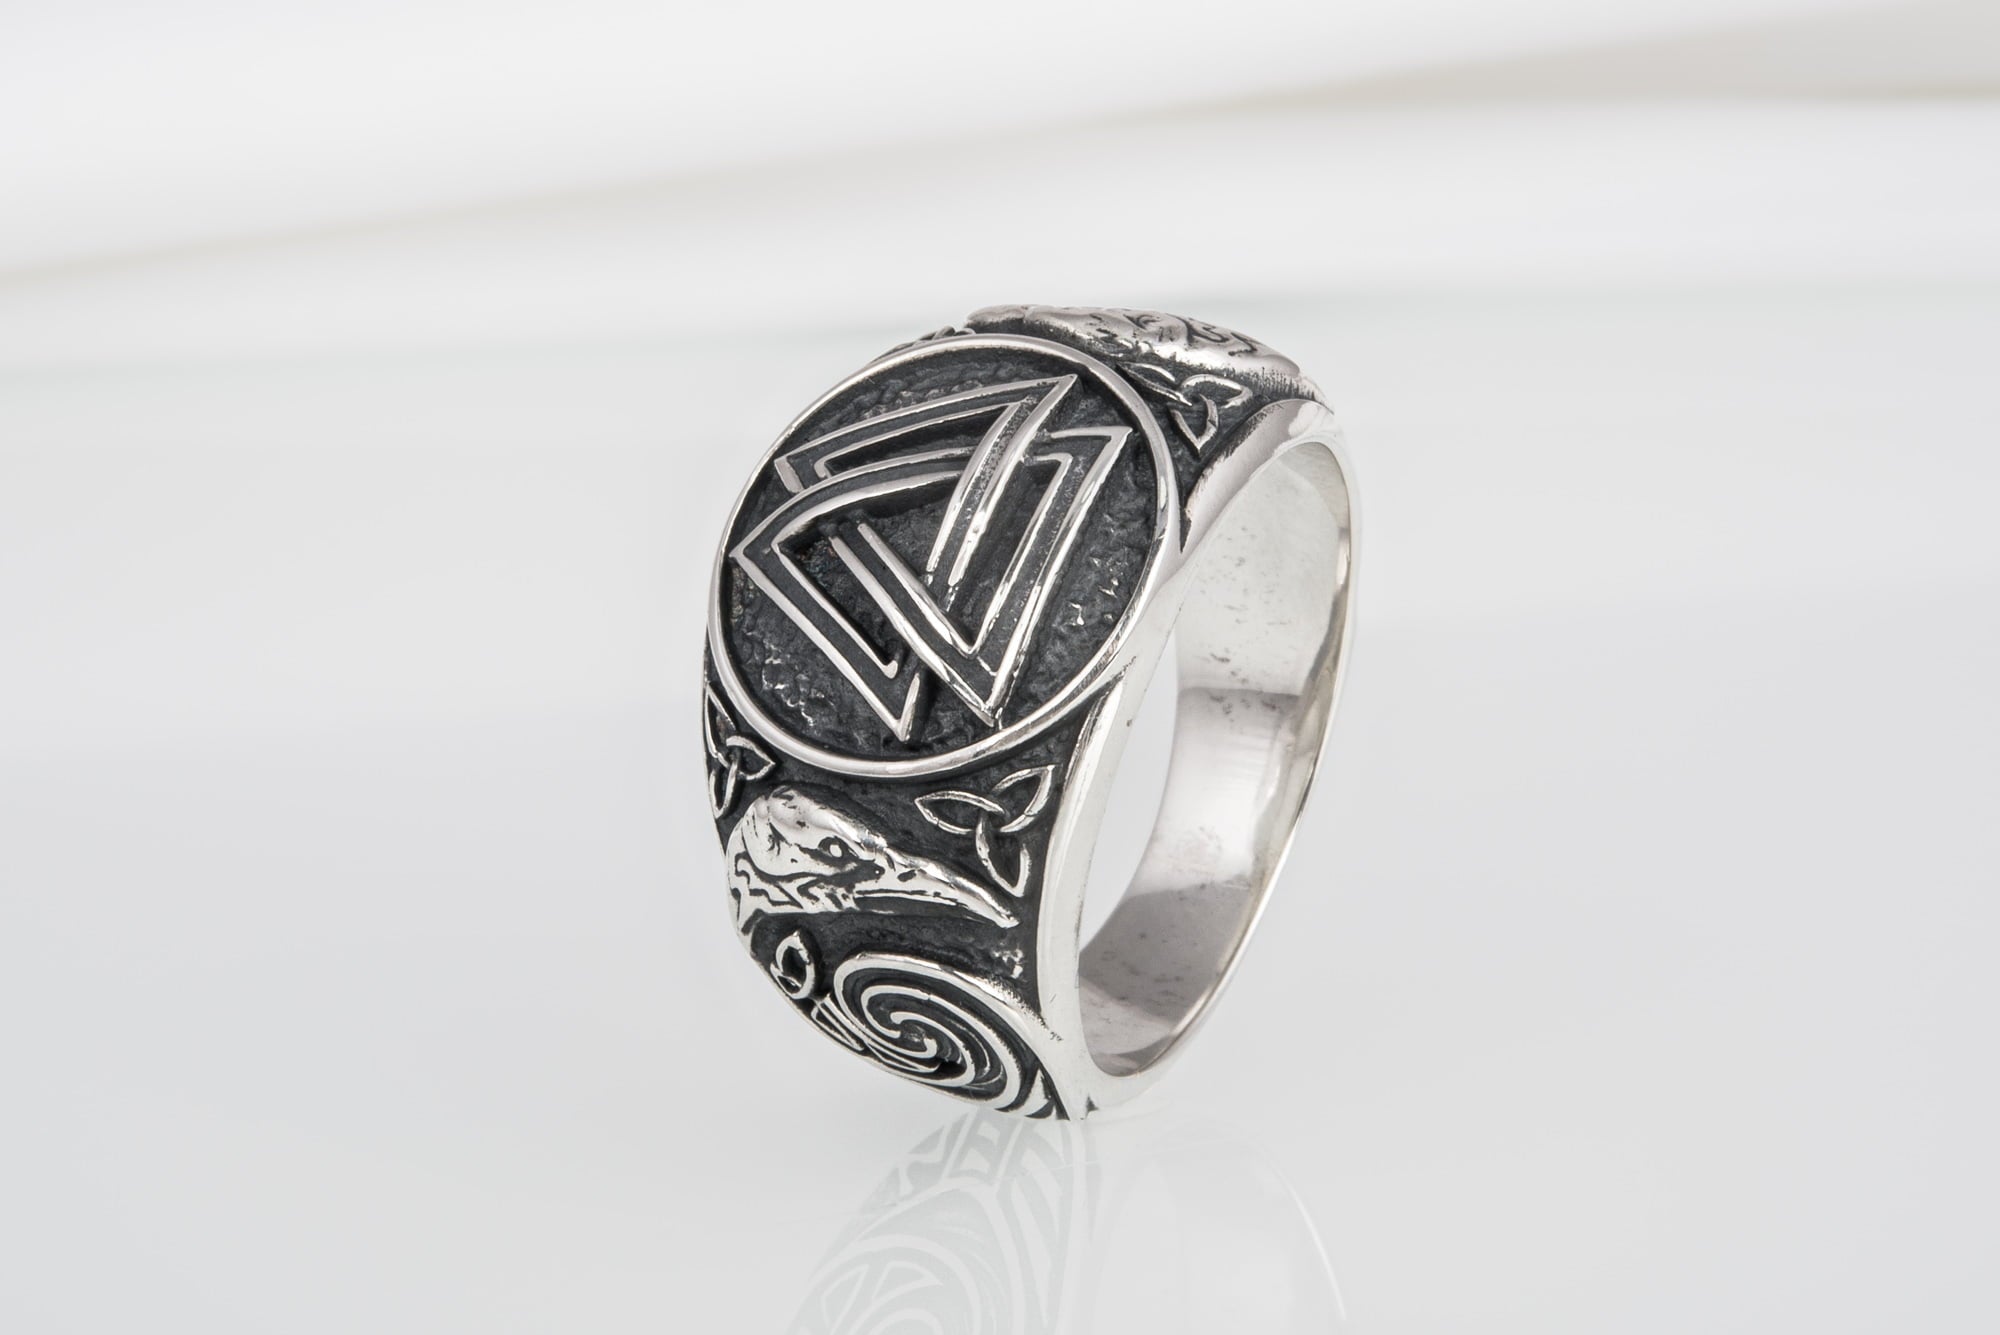 Unique Norse sterling silver ring with Valknut and Odin Ravens, handcrafted ornament jewelry - vikingworkshop